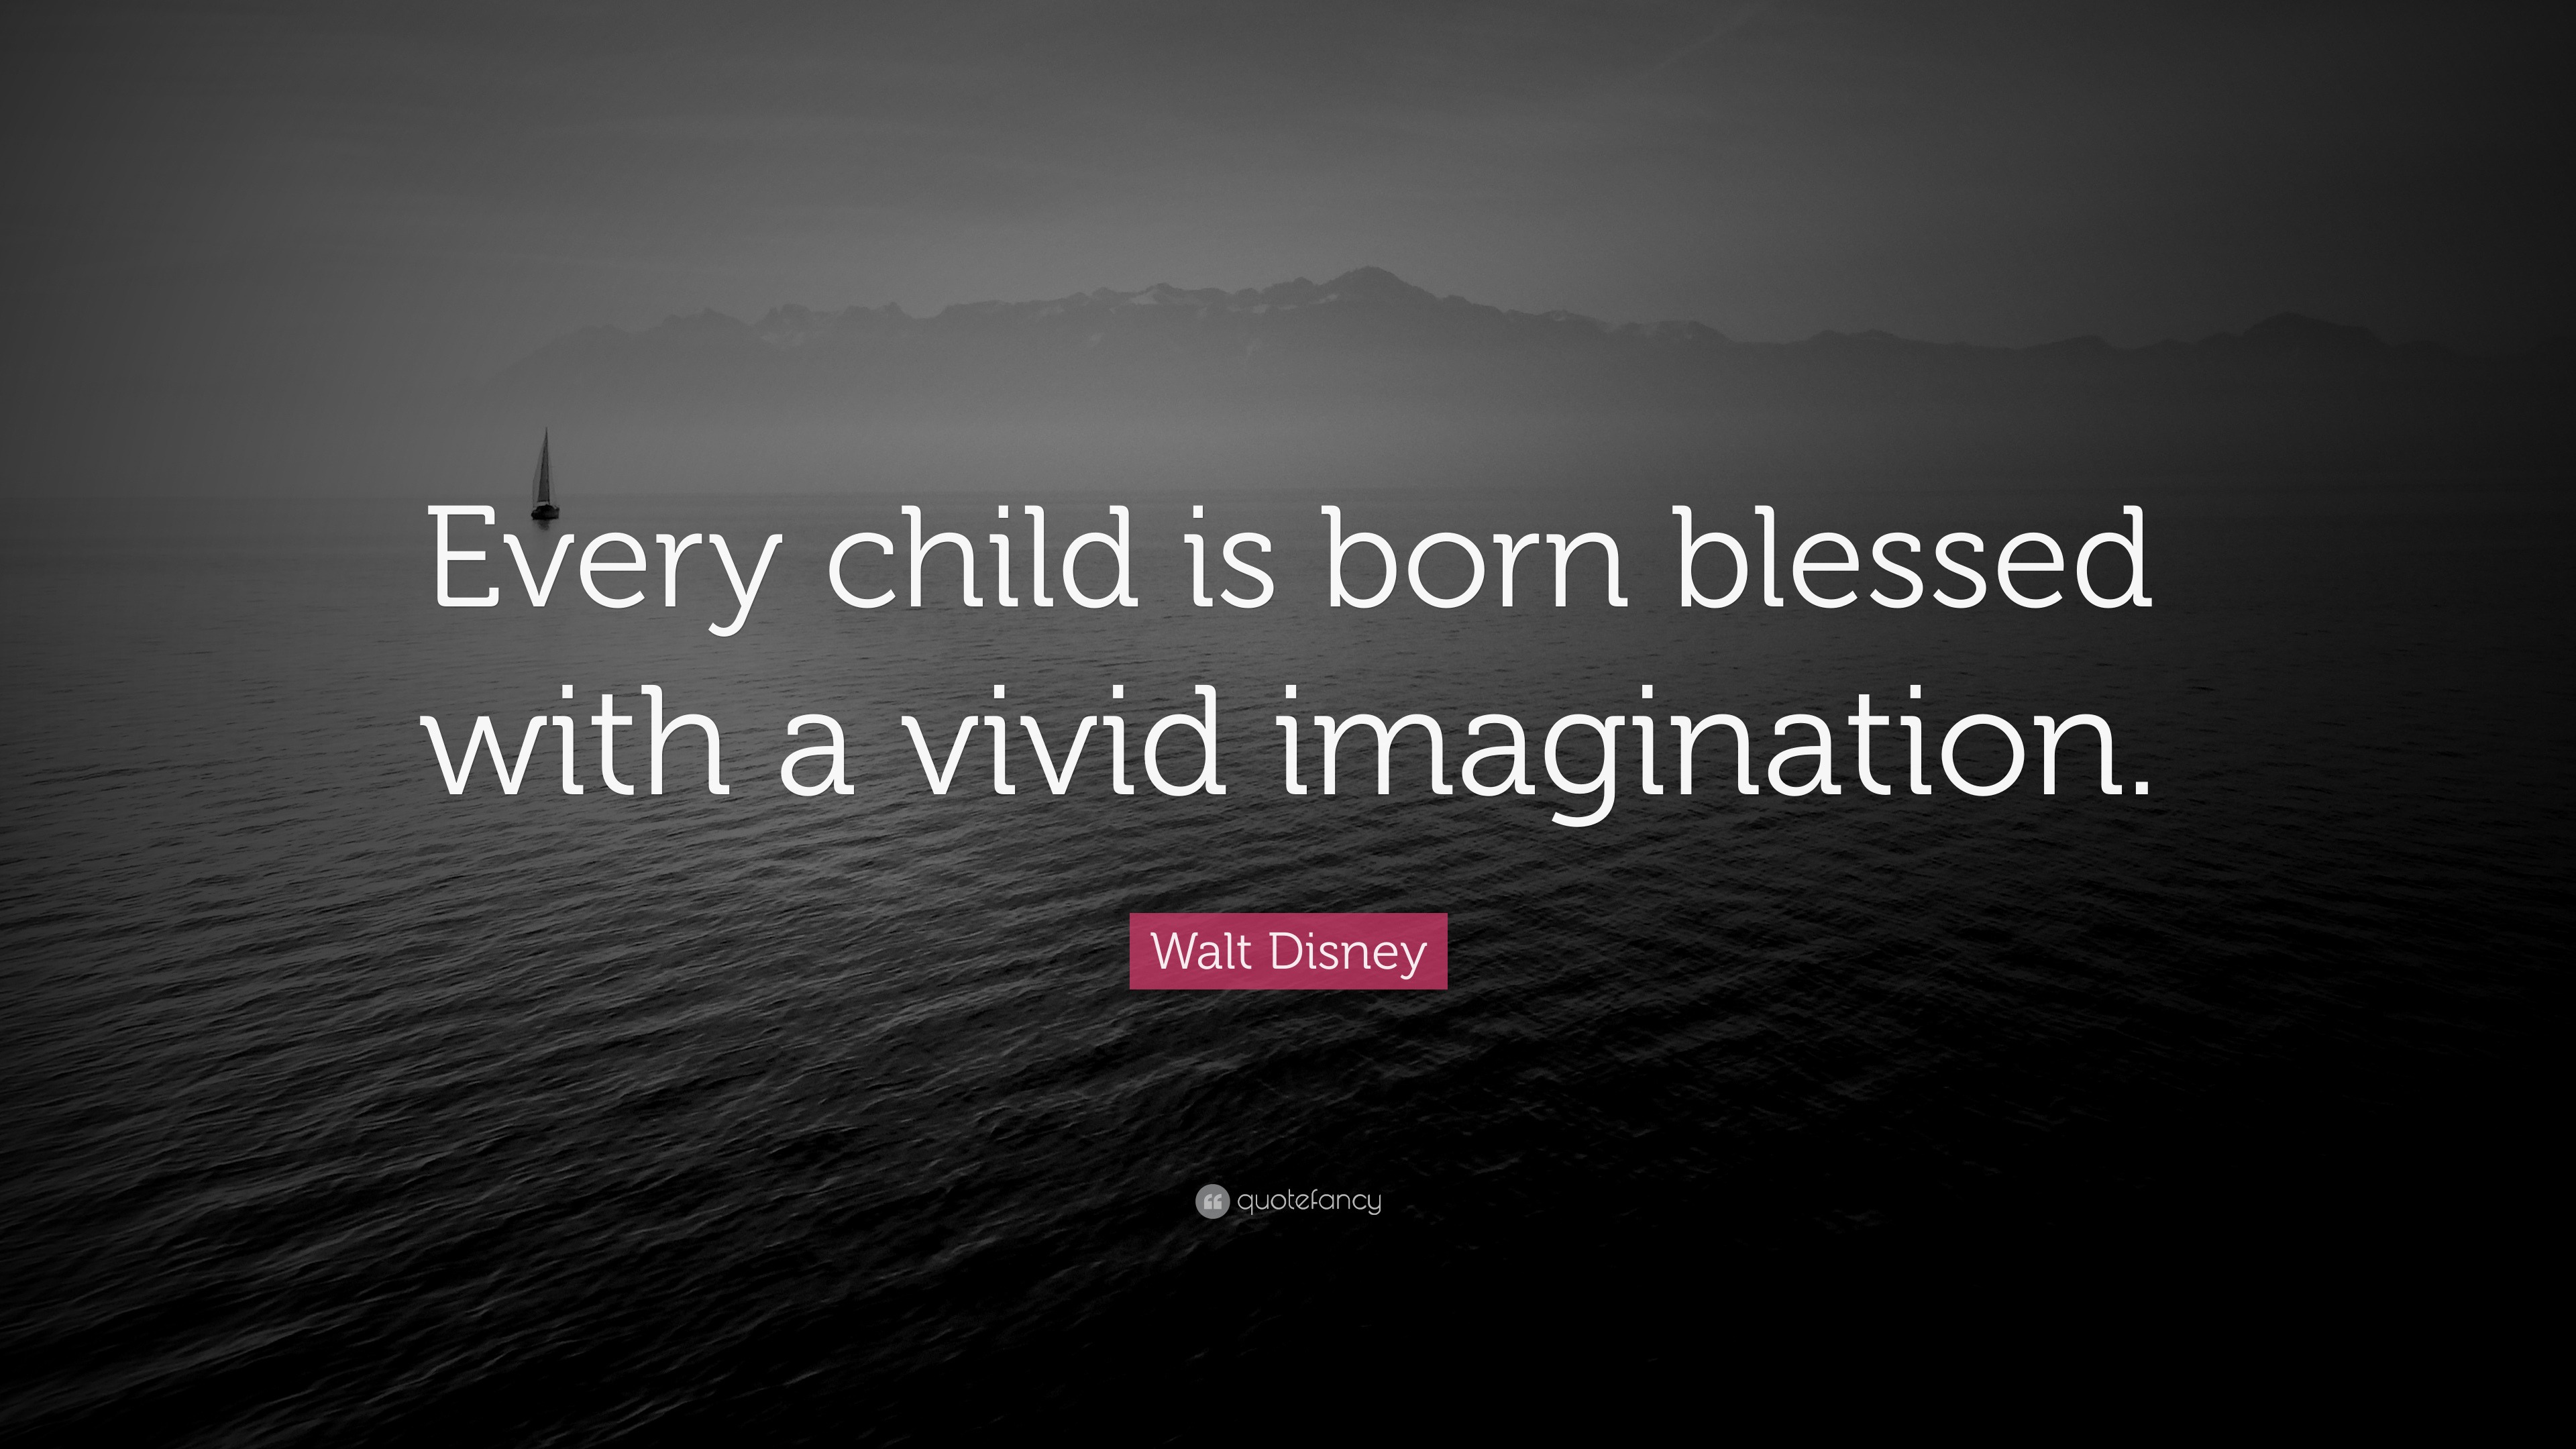 Walt Disney Quote: “Every child is born blessed with a vivid imagination.”